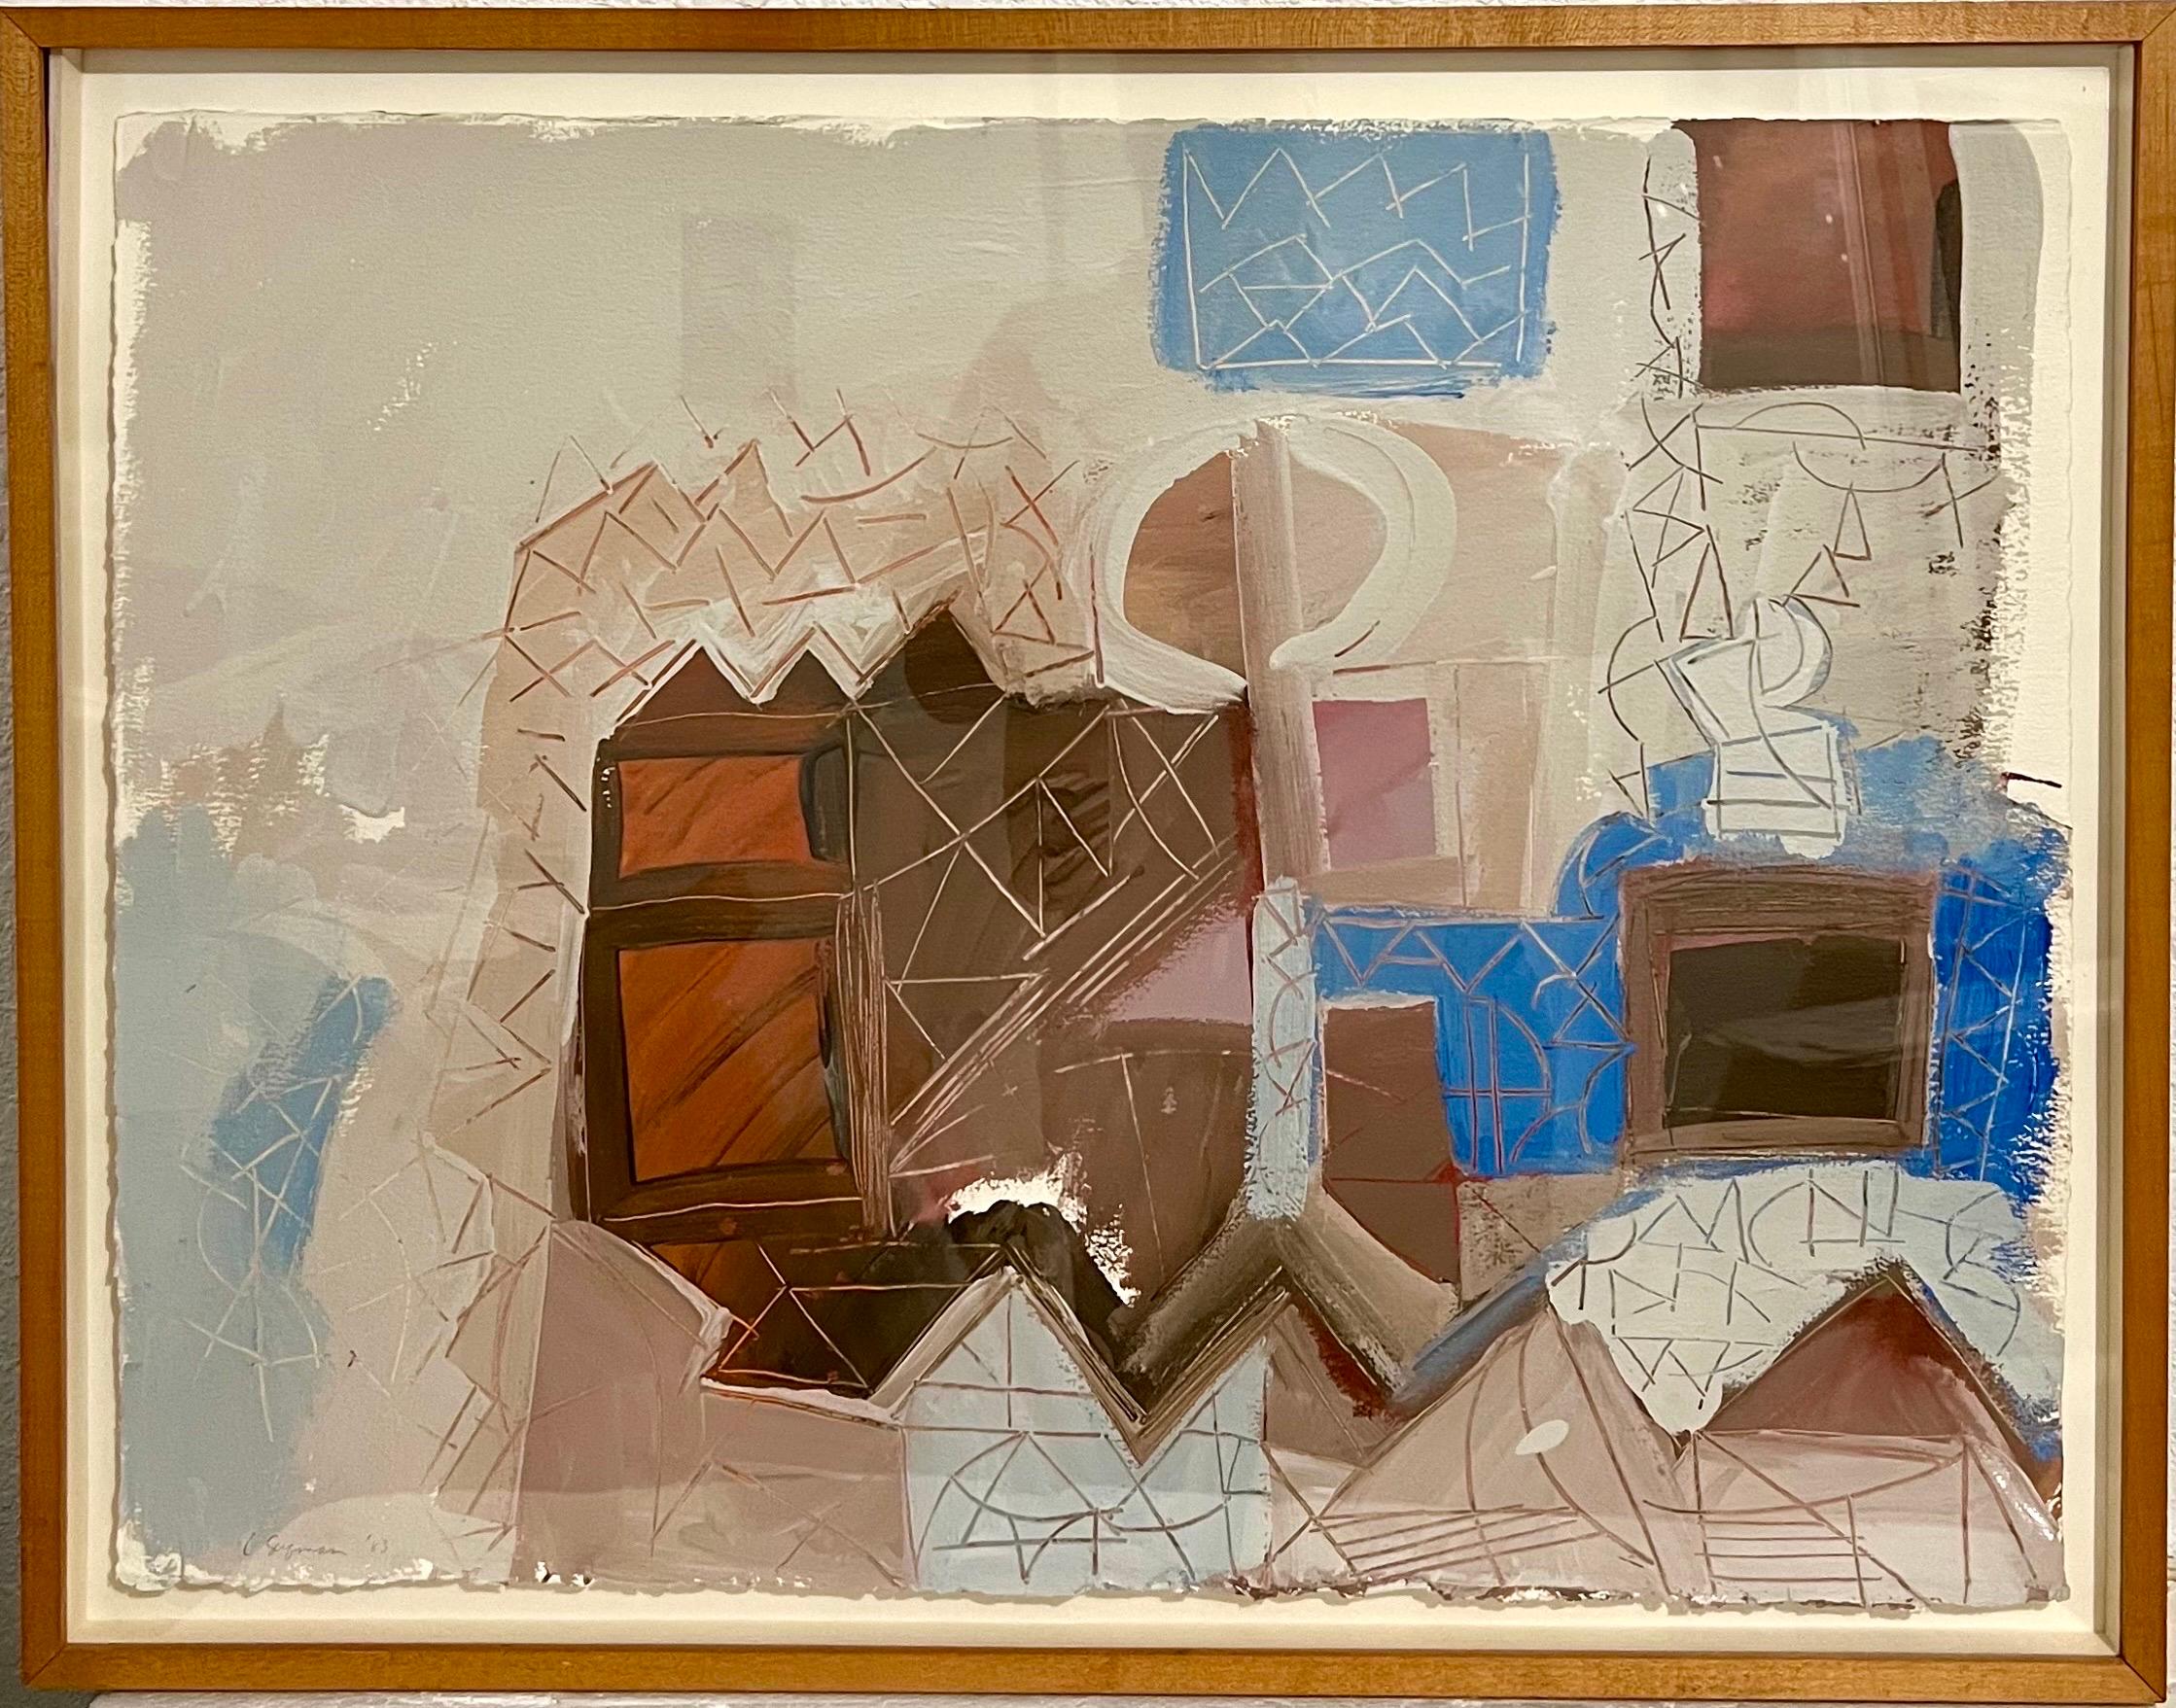 Lynne Golob Gelfman, American (1944-2020)
Abstract Composition in colors
Acrylic paint on paper
1983
Hand signed and dated recto
23" X 29", Frame measures 26" X 33".
Provenance: Jan Van der Marck collection on loan to the Detroit Institute for the